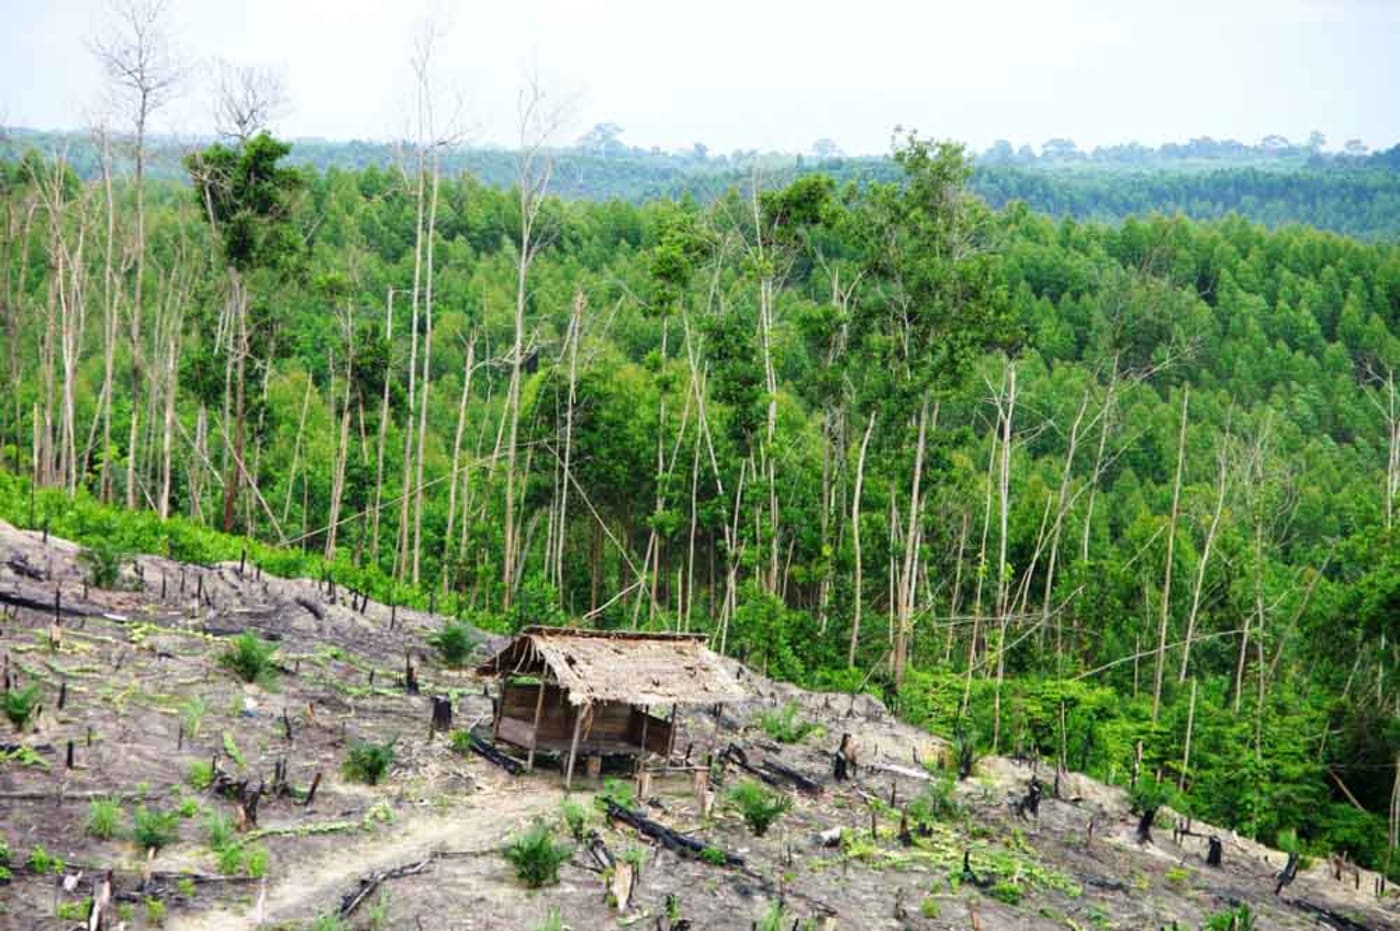 Natural forest cleared for pulp plantation development, Sumatra, Indonesia, February 2010